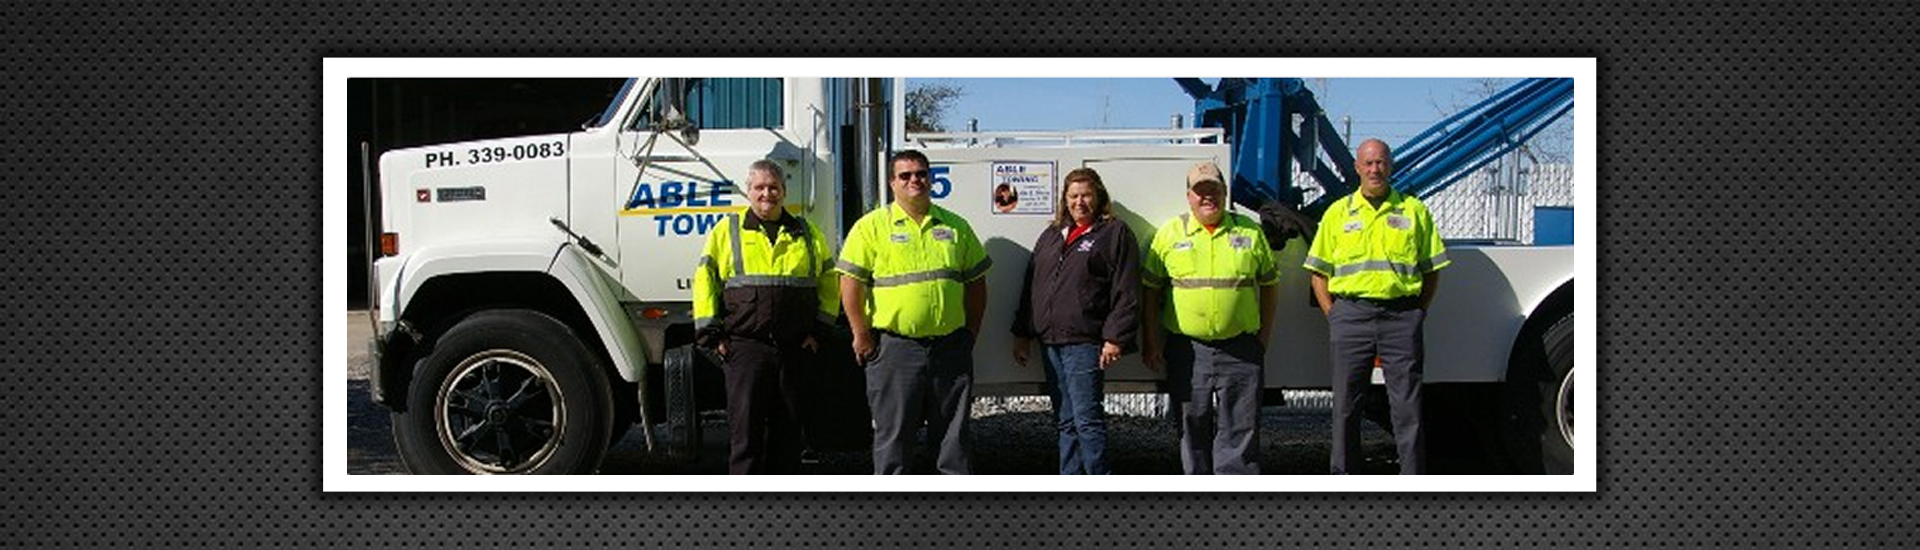 Able Towing Crew Posing Infront of Towing Vehicle